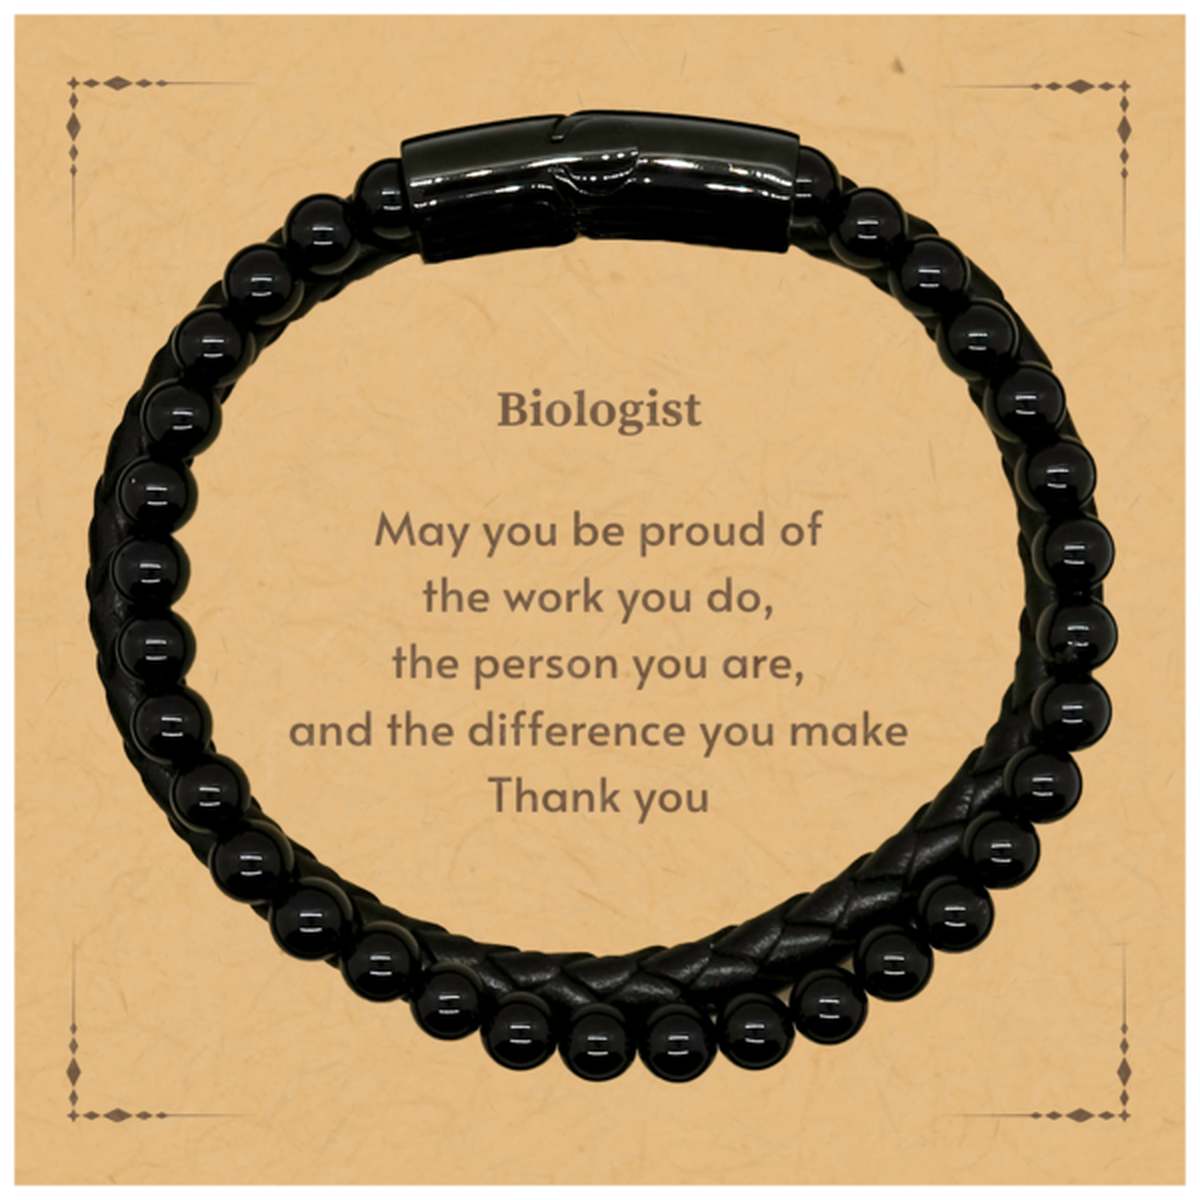 Heartwarming Stone Leather Bracelets Retirement Coworkers Gifts for Biologist, Biologist May You be proud of the work you do, the person you are Gifts for Boss Men Women Friends